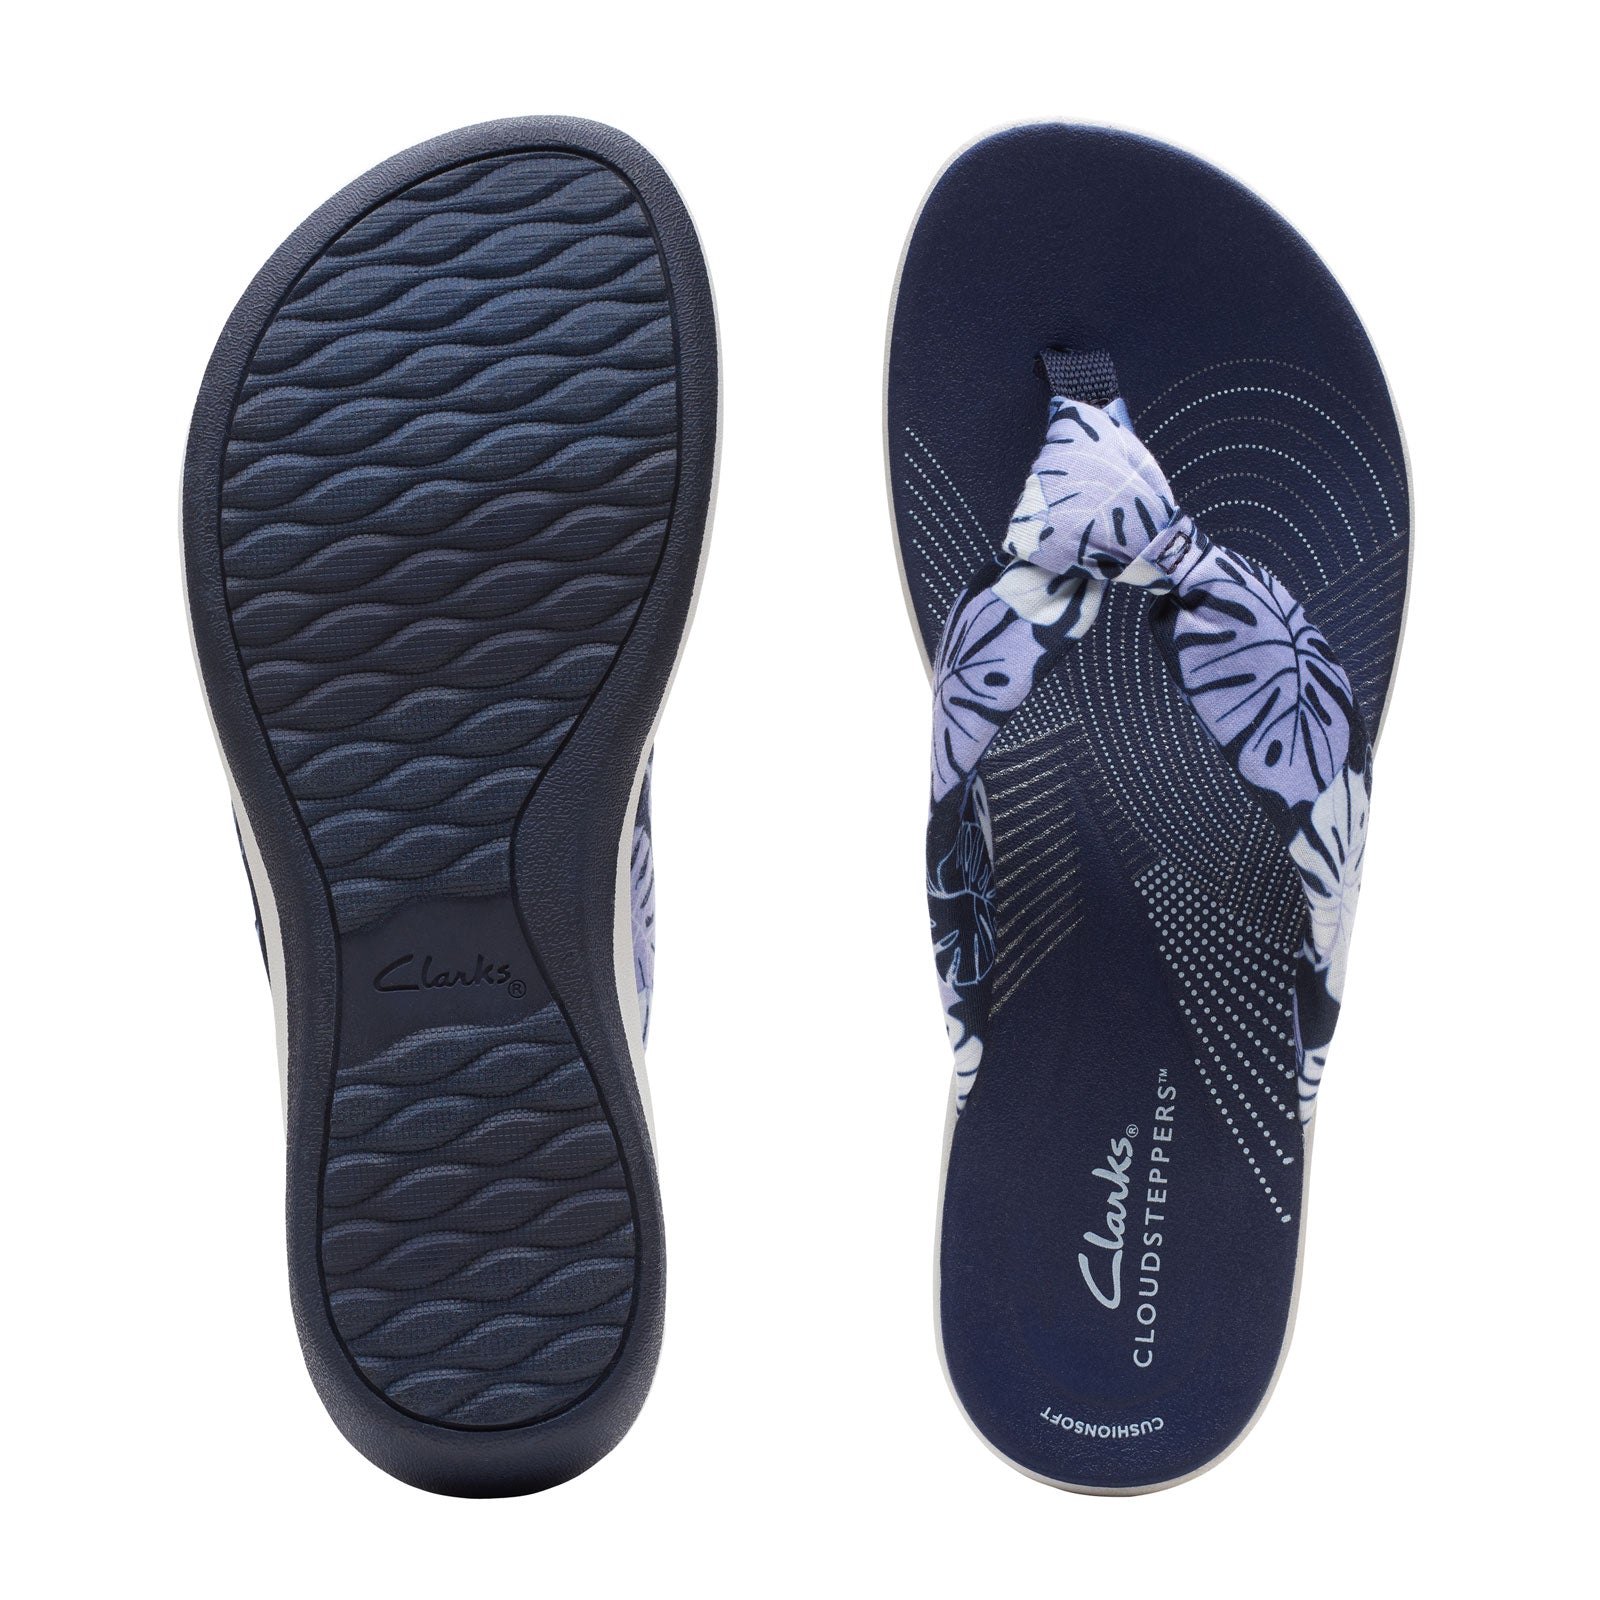 Clarks Arla Glison Thong Sandal (Women) - Blue Floral Synthetic Sandals - Thong - The Heel Shoe Fitters